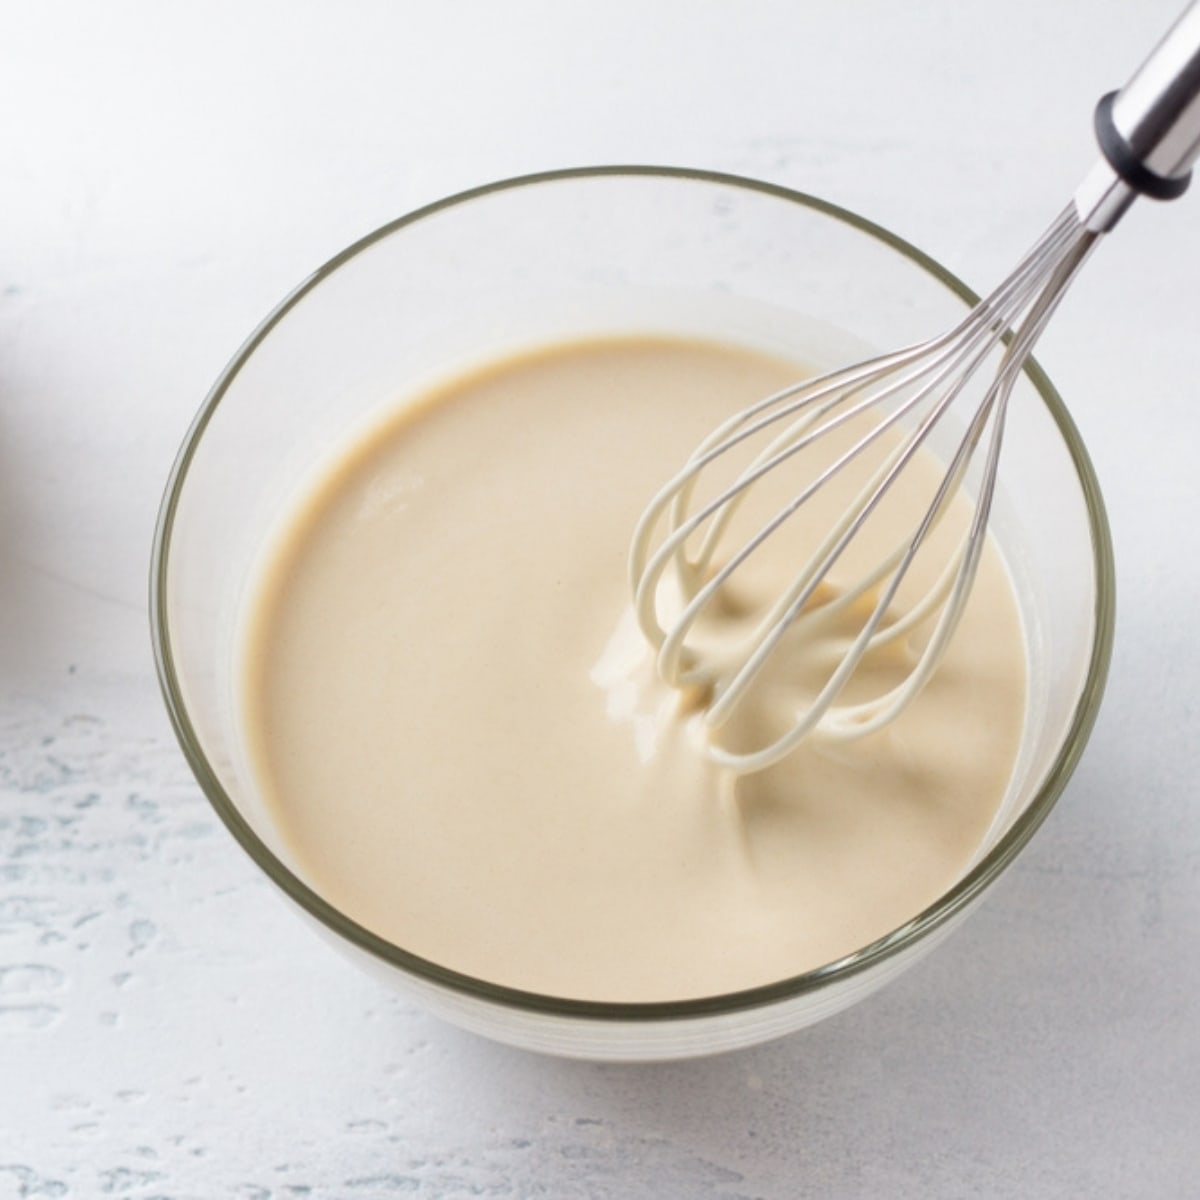 Pancake Batter With Whisk in a Glass Bowl